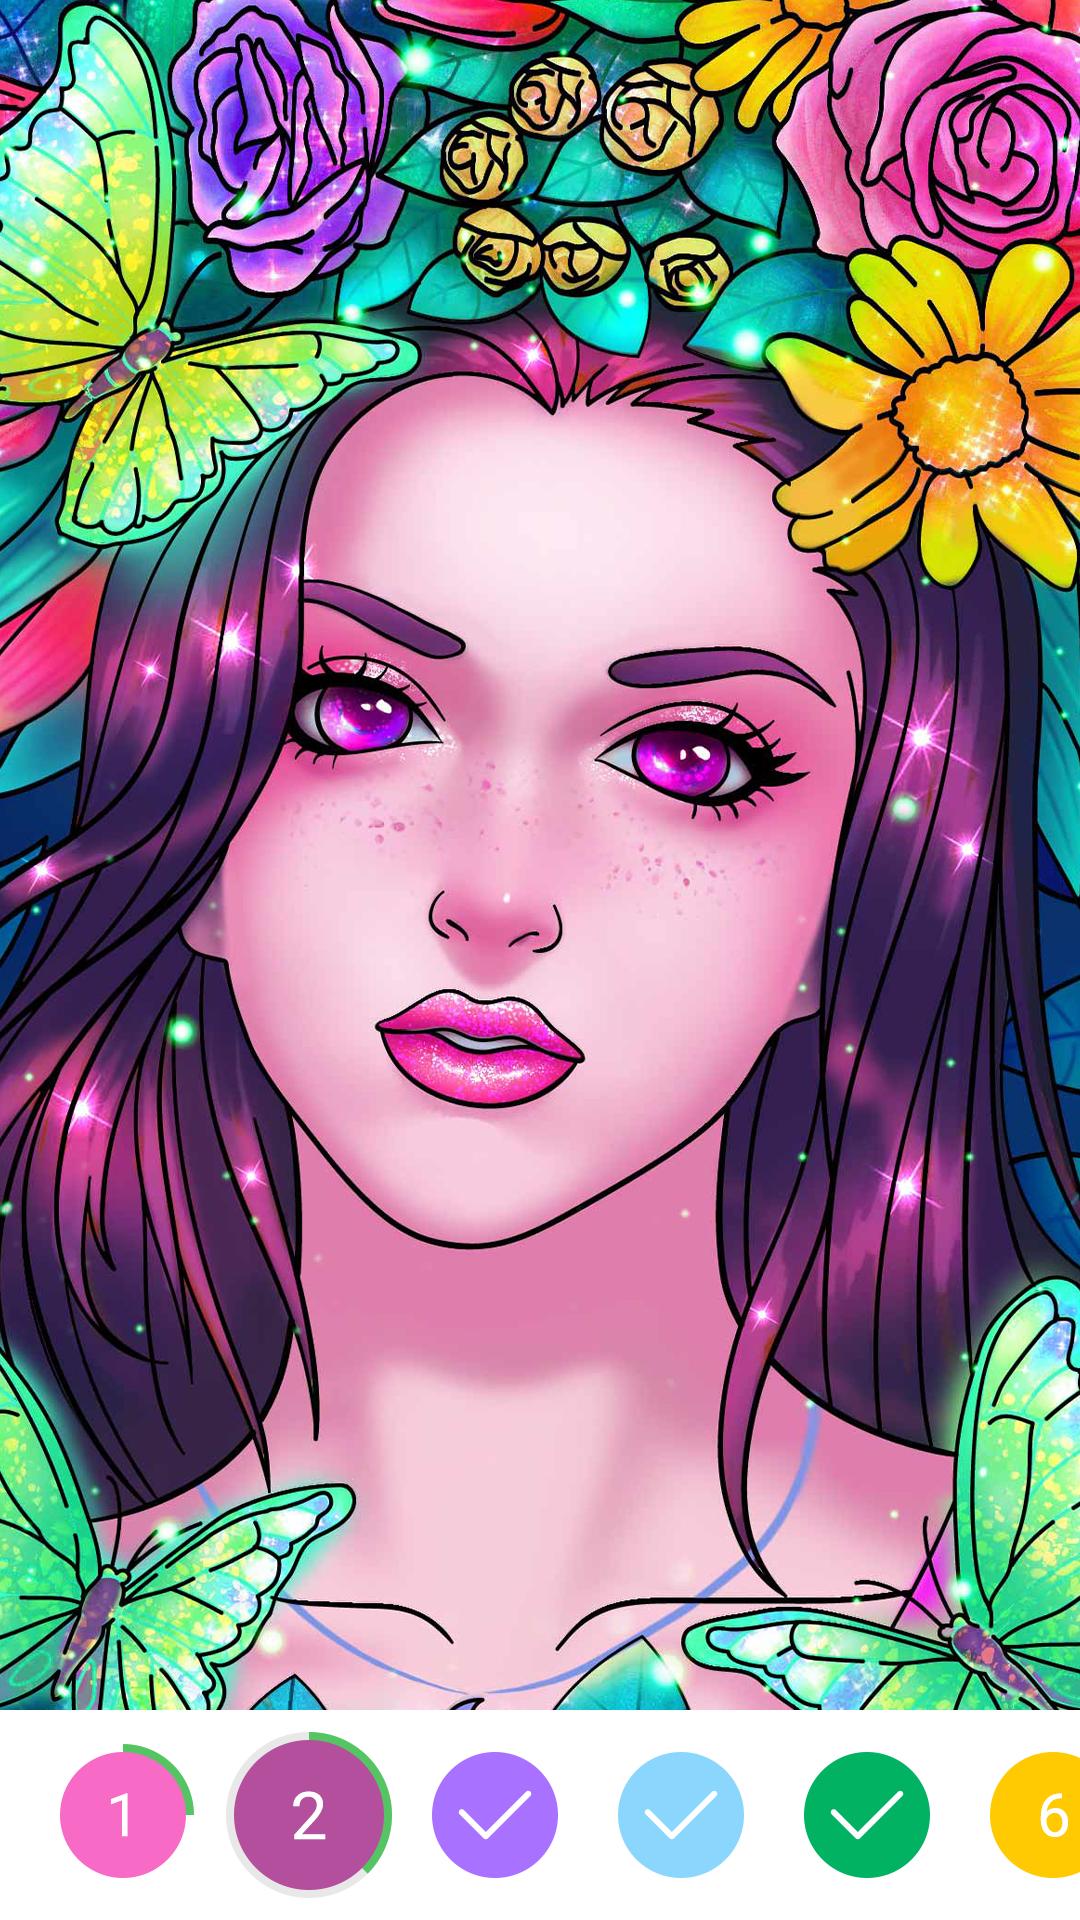 Coloring Book Color by Number & Paint by Number 1.6.11 Screenshot 19